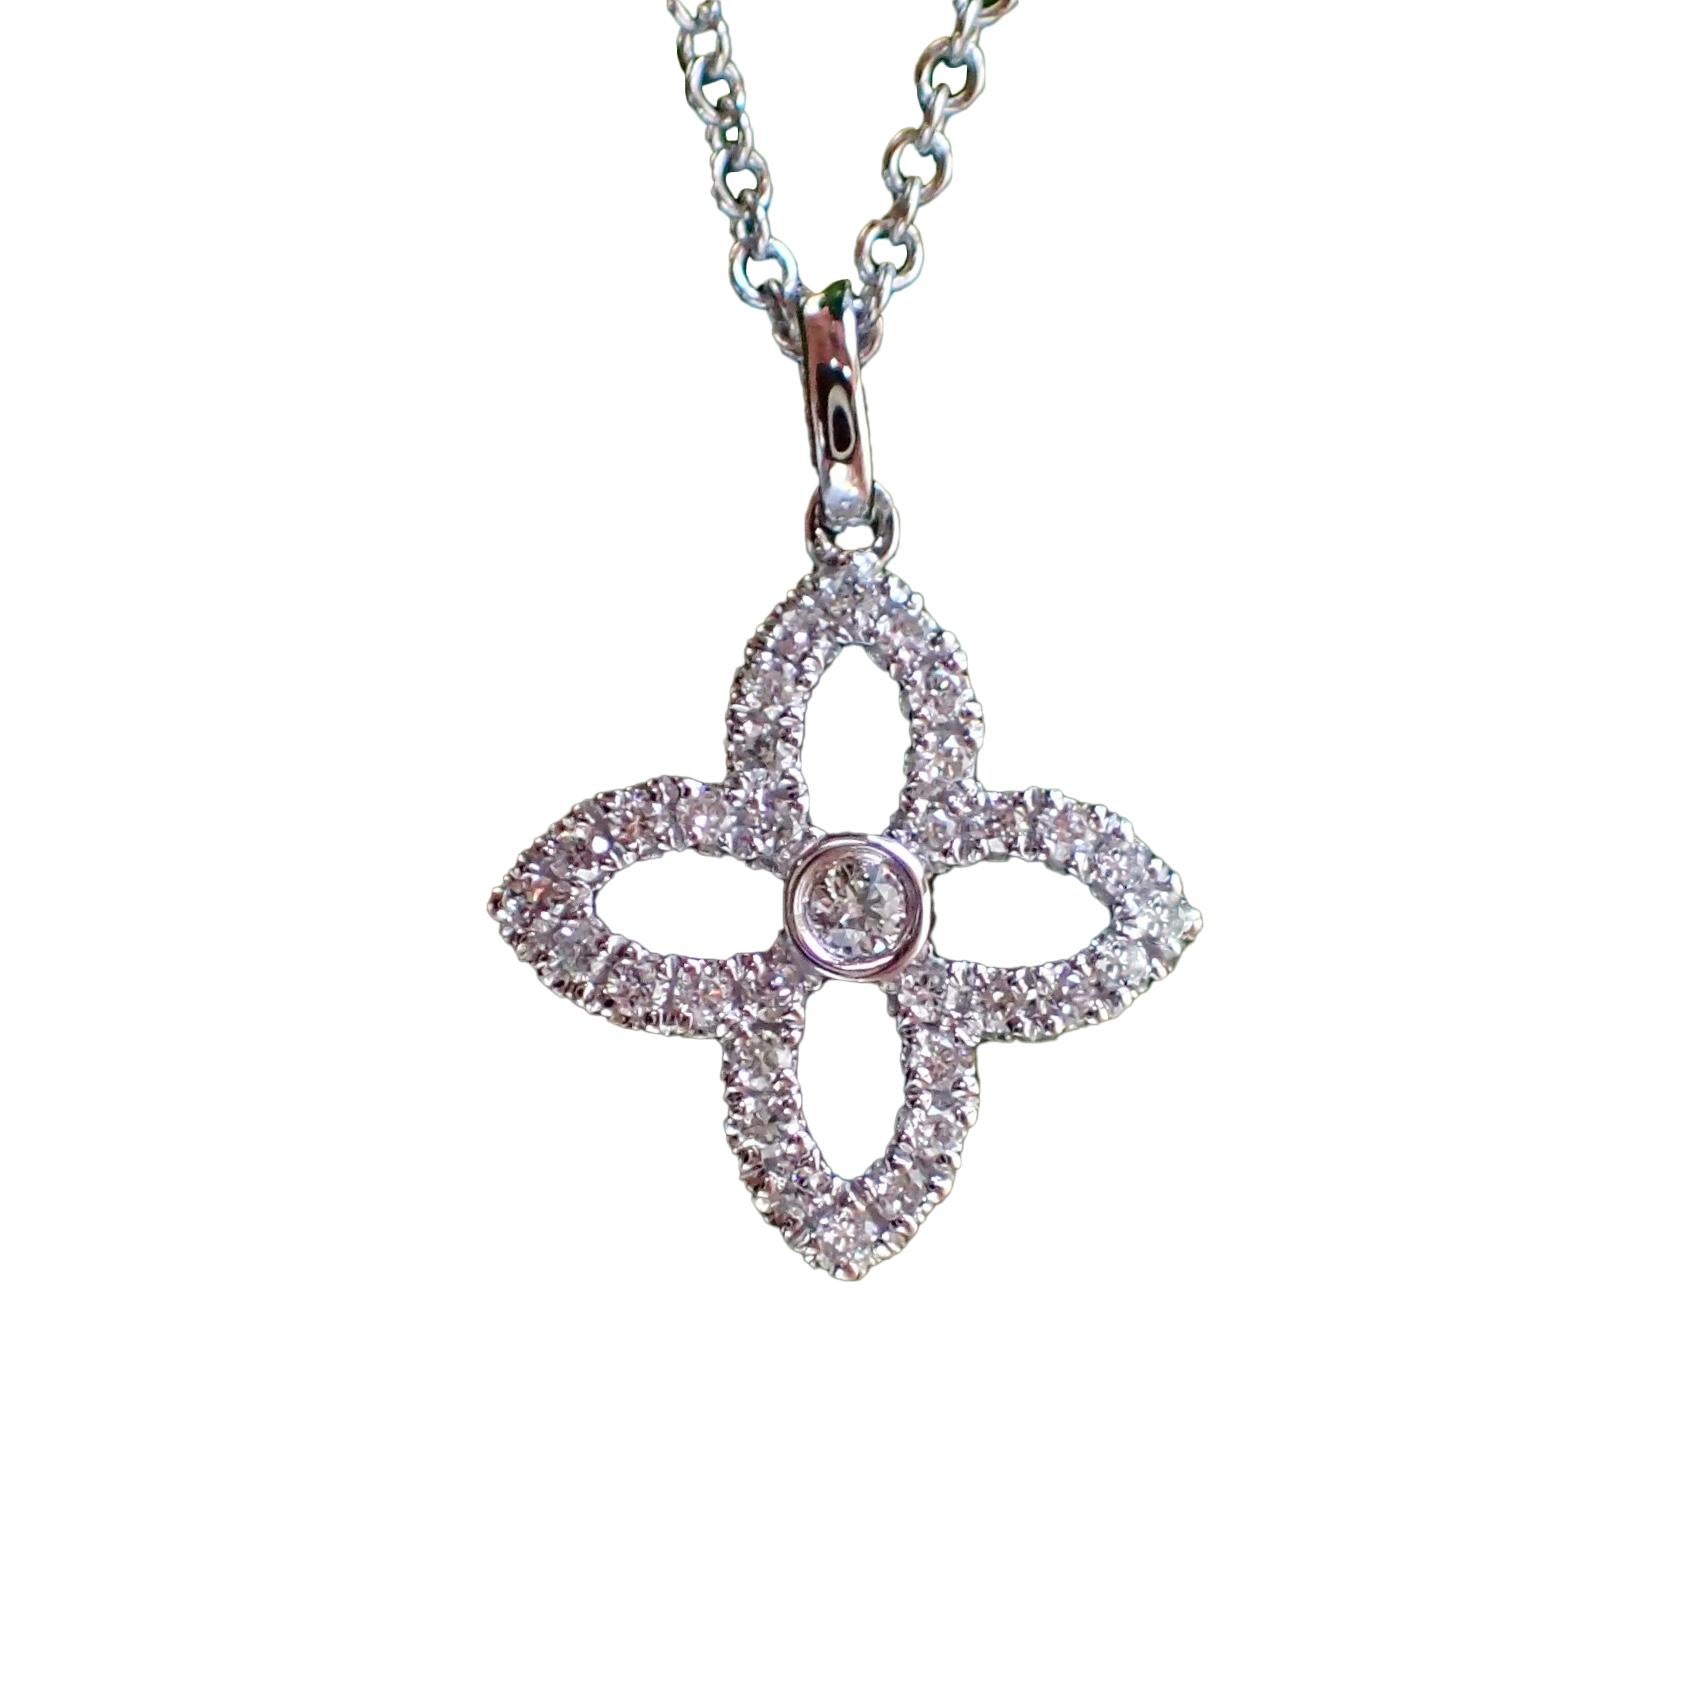 18 Karat Gold Flower Pendant with 0.19 Carat of Diamond Hangs from a Cable Chain For Sale